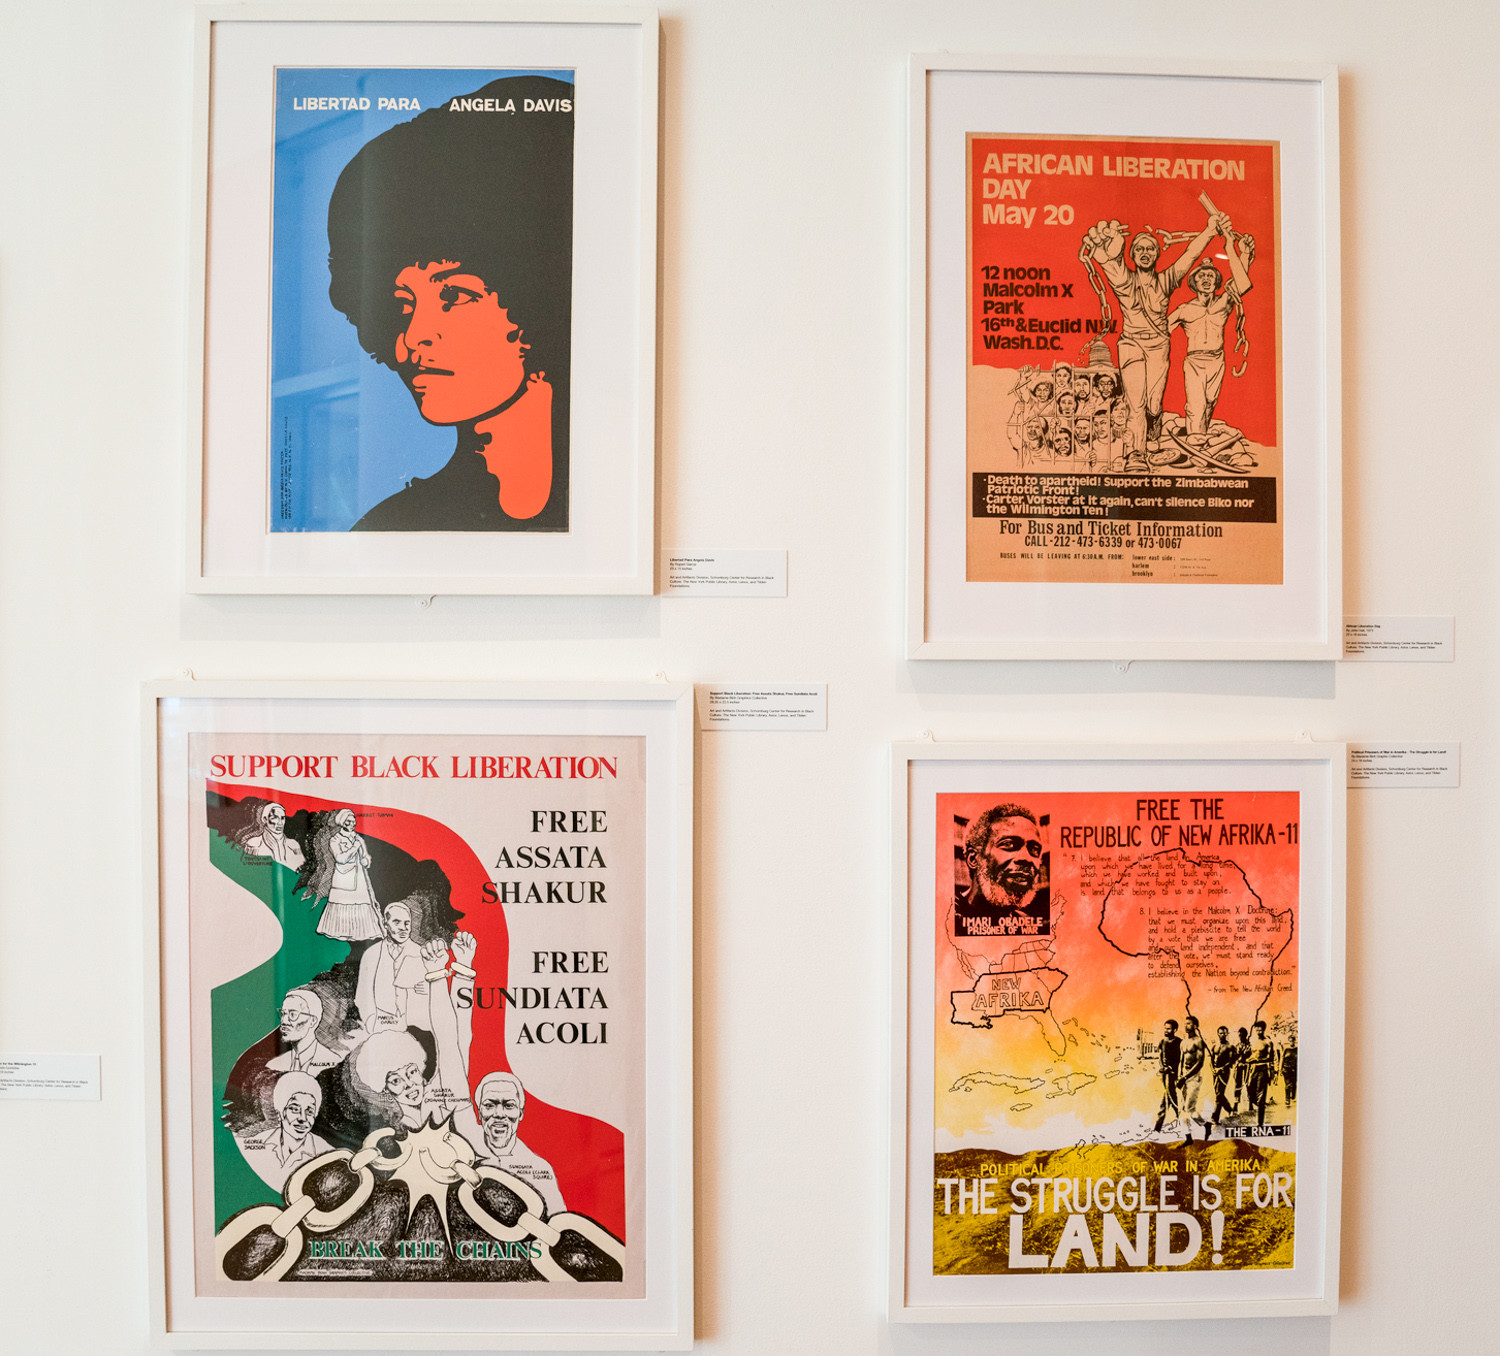 ‘Power in Print,’ an exhibition at the Schomburg Center for Research in Black Culture in Harlem, shows the posters of the black power movement. It runs through March 31.